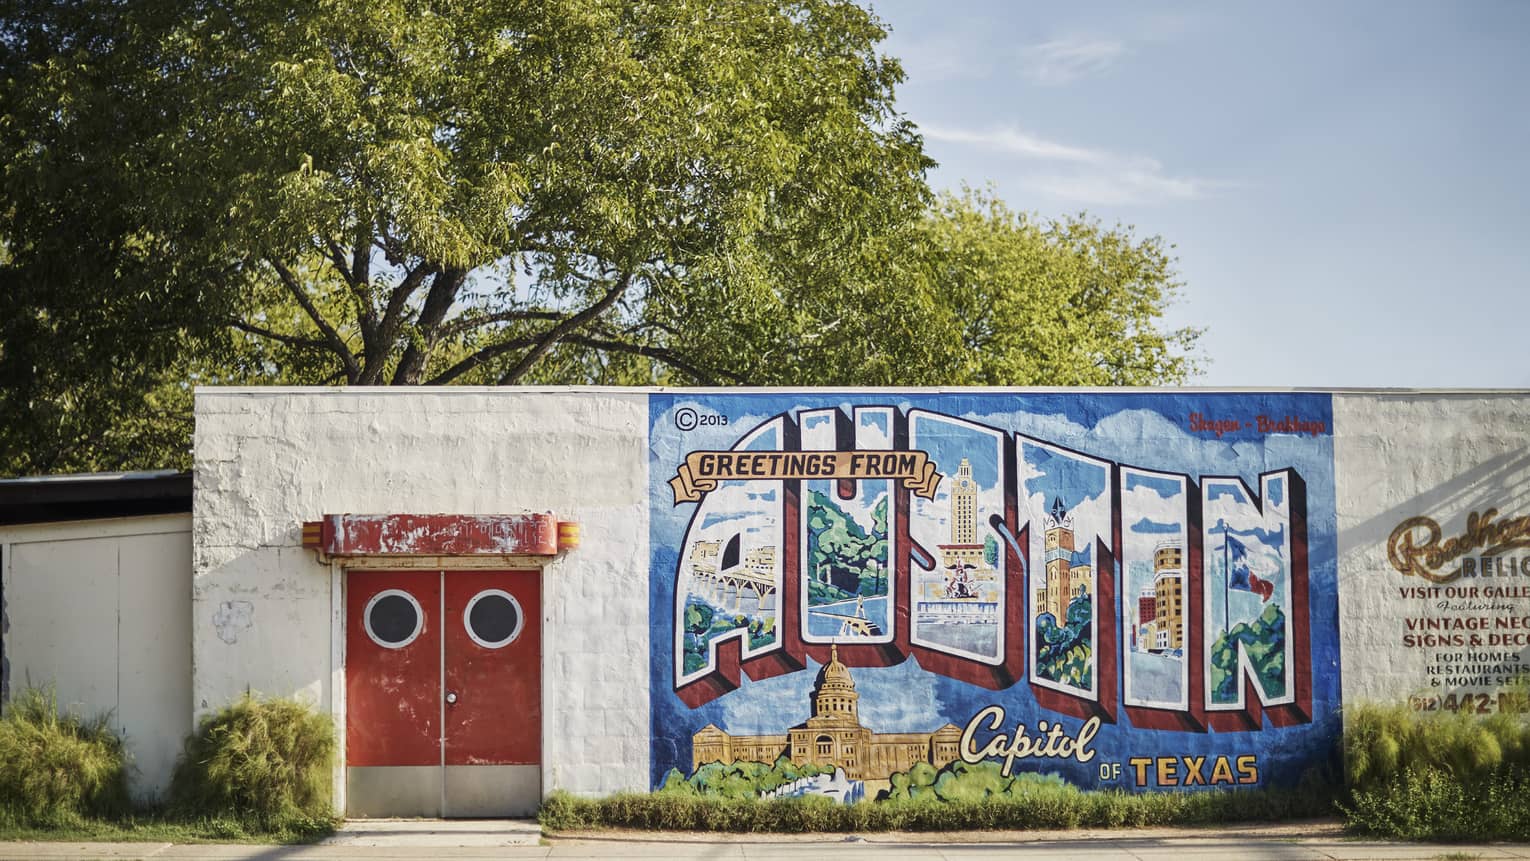 Welcome to Austin Mural painted on building